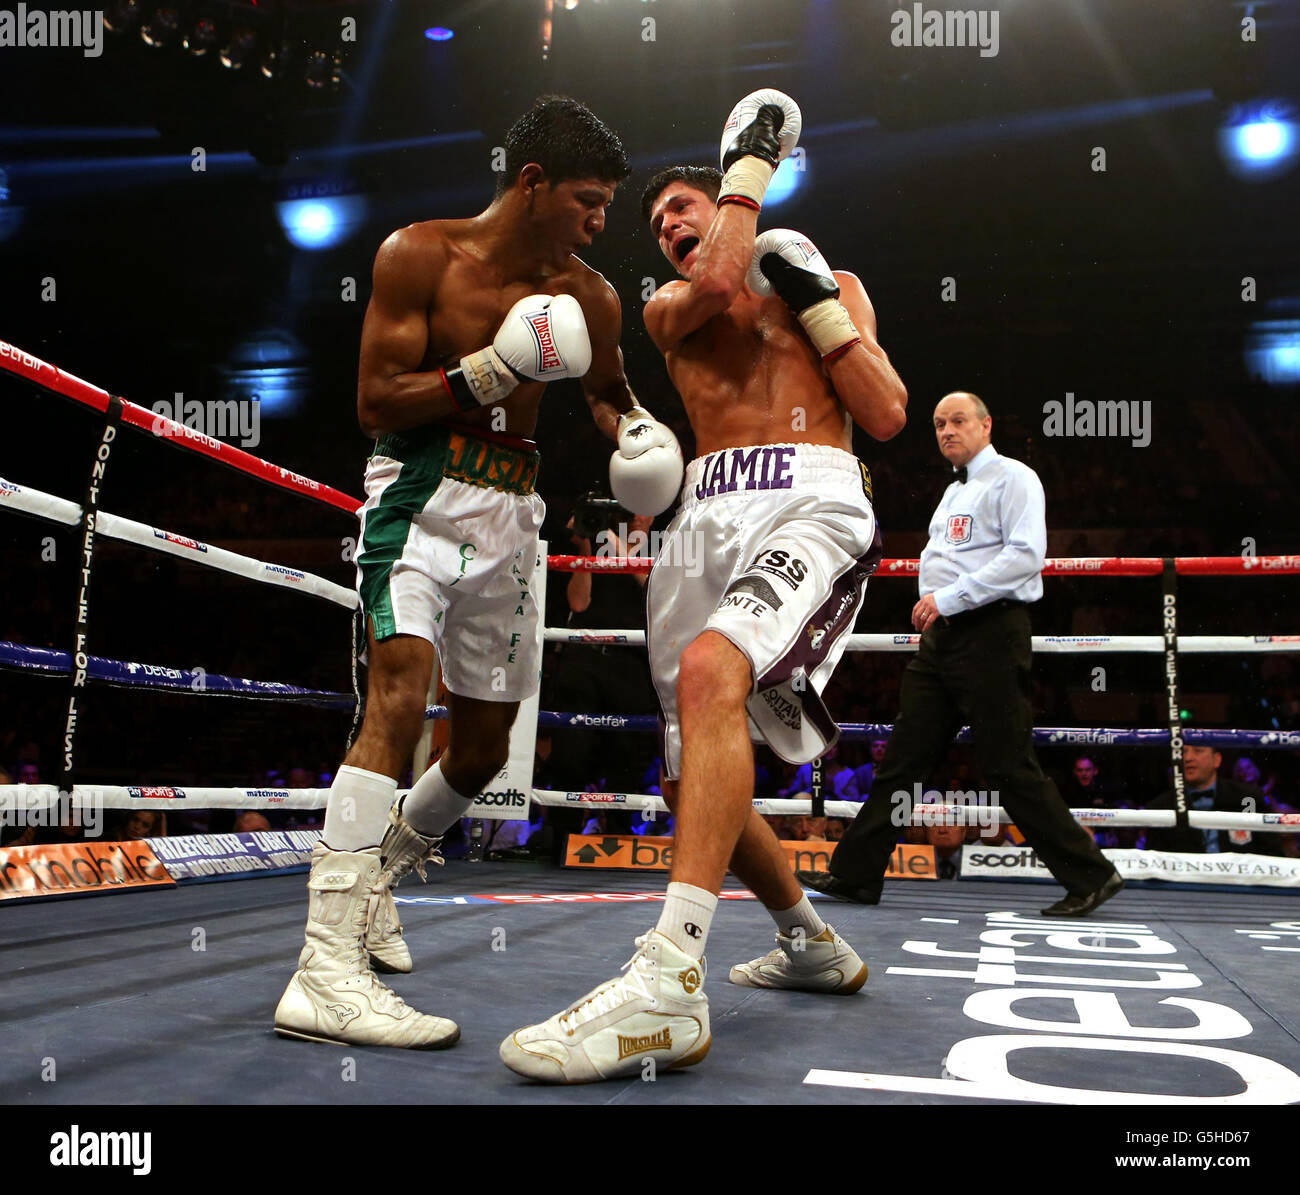 Jamie McDonnell (right) during his 8th round win over Darwin Zamora at the Motorpoint Arena, Sheffield. Stock Photo